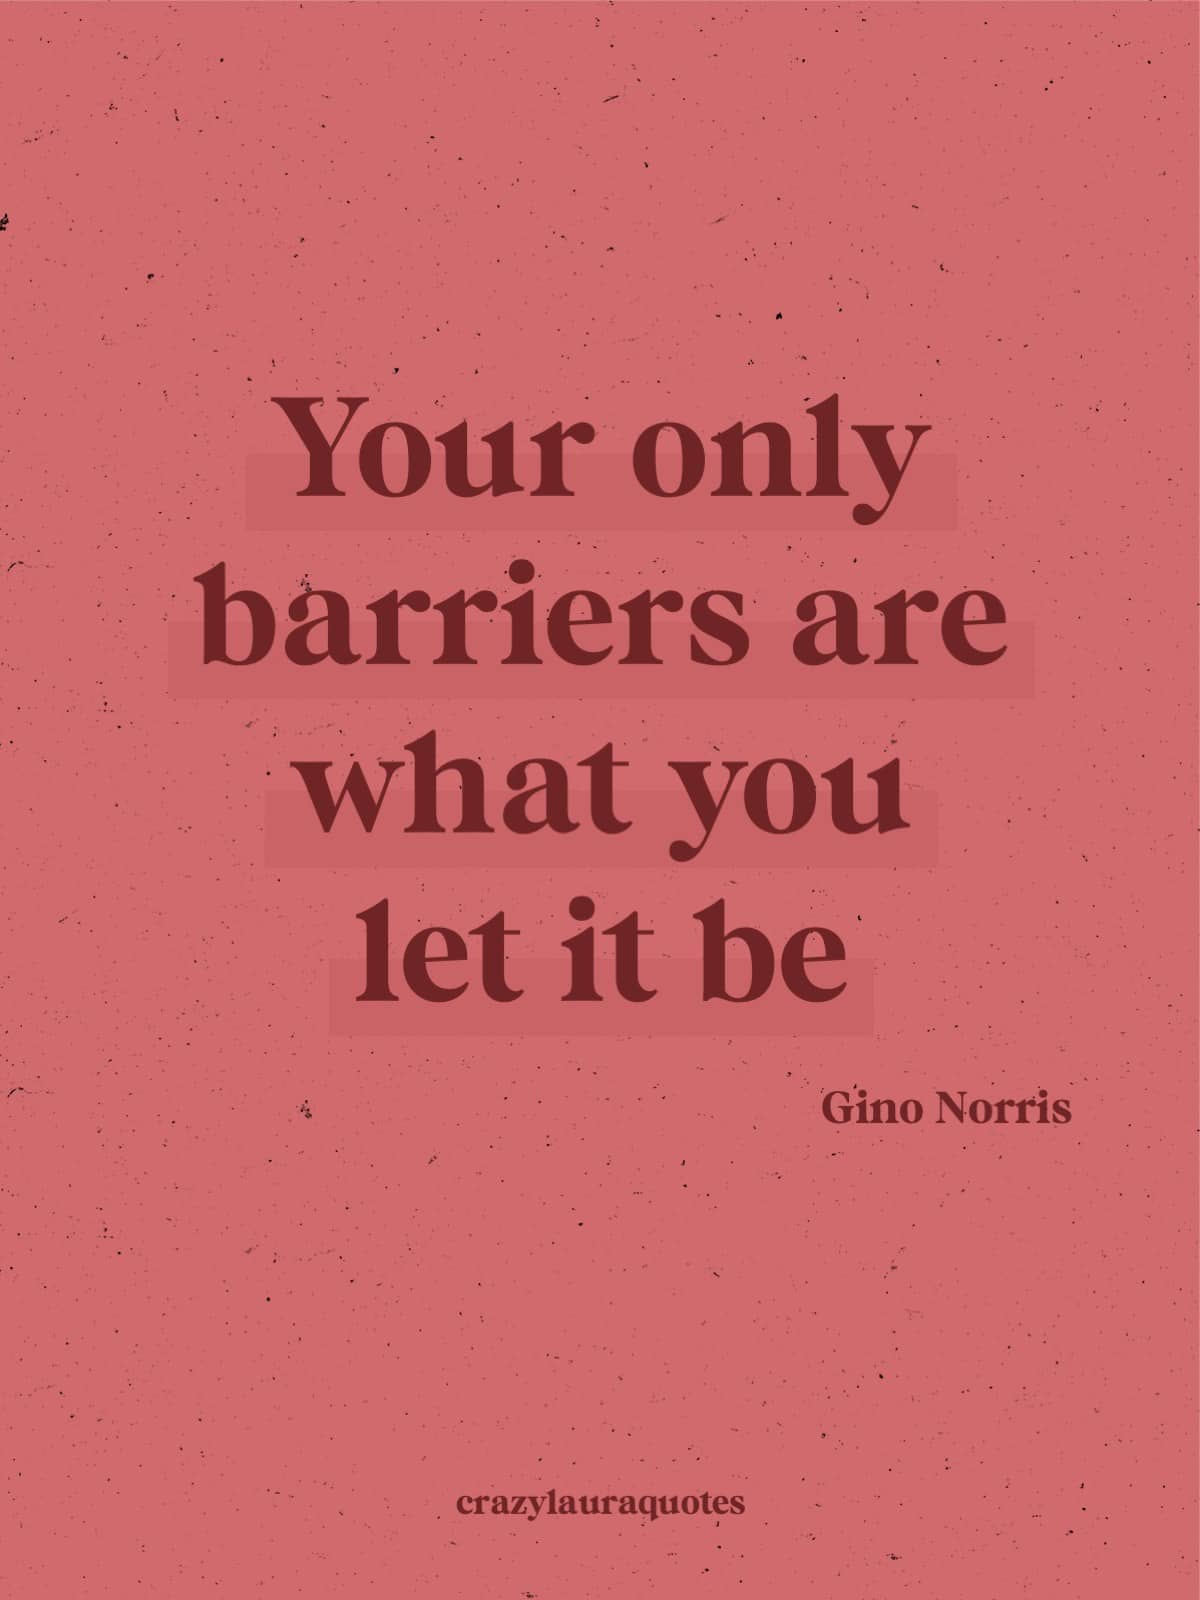 remove the barriers